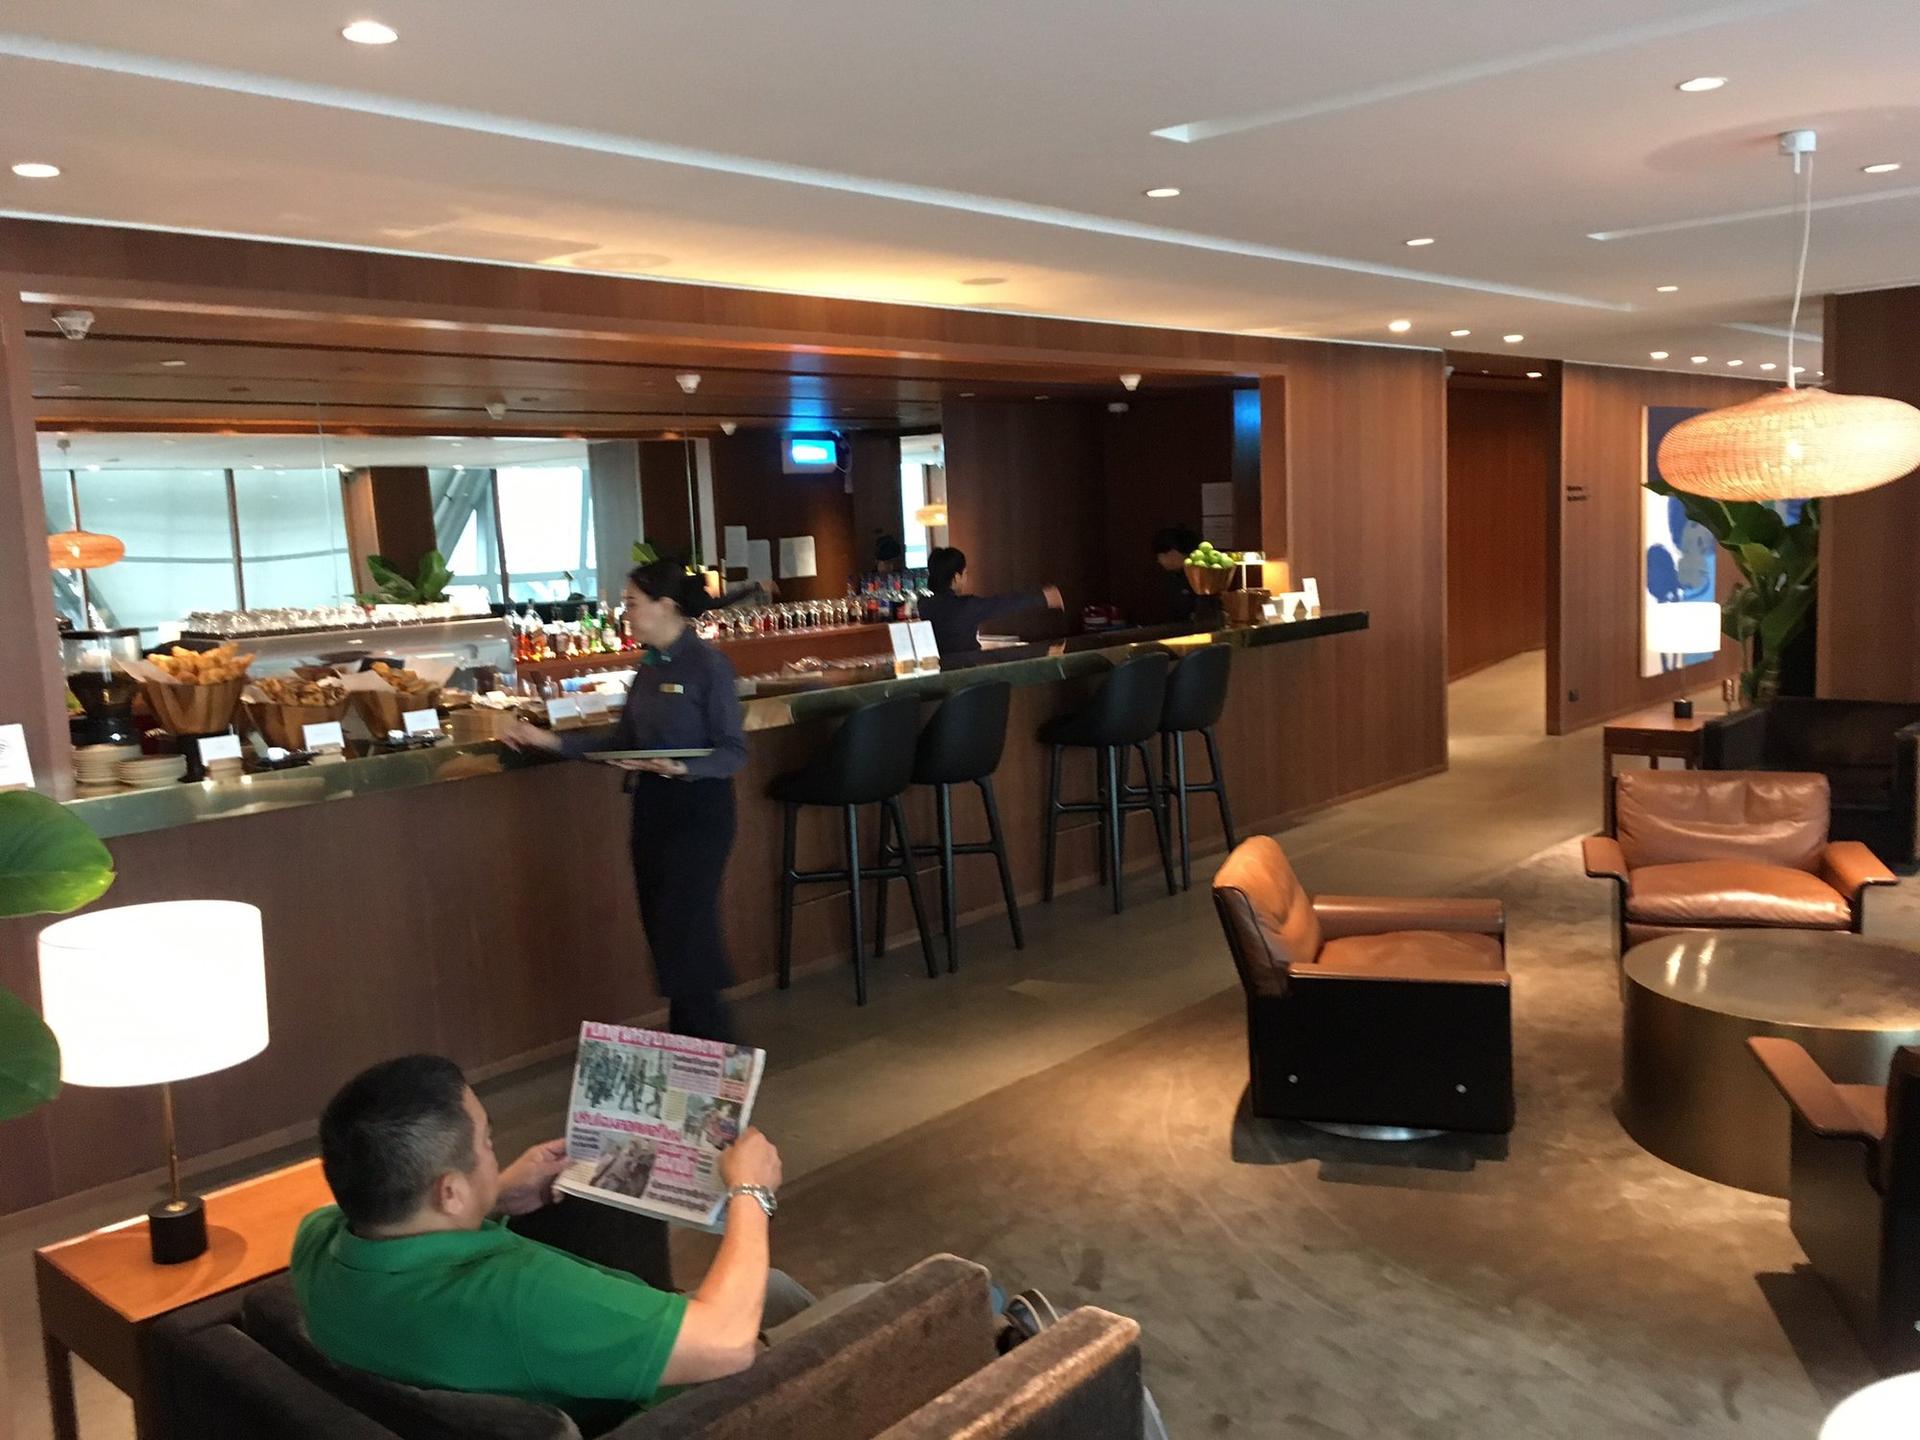 Cathay Pacific First and Business Class Lounge image 57 of 69